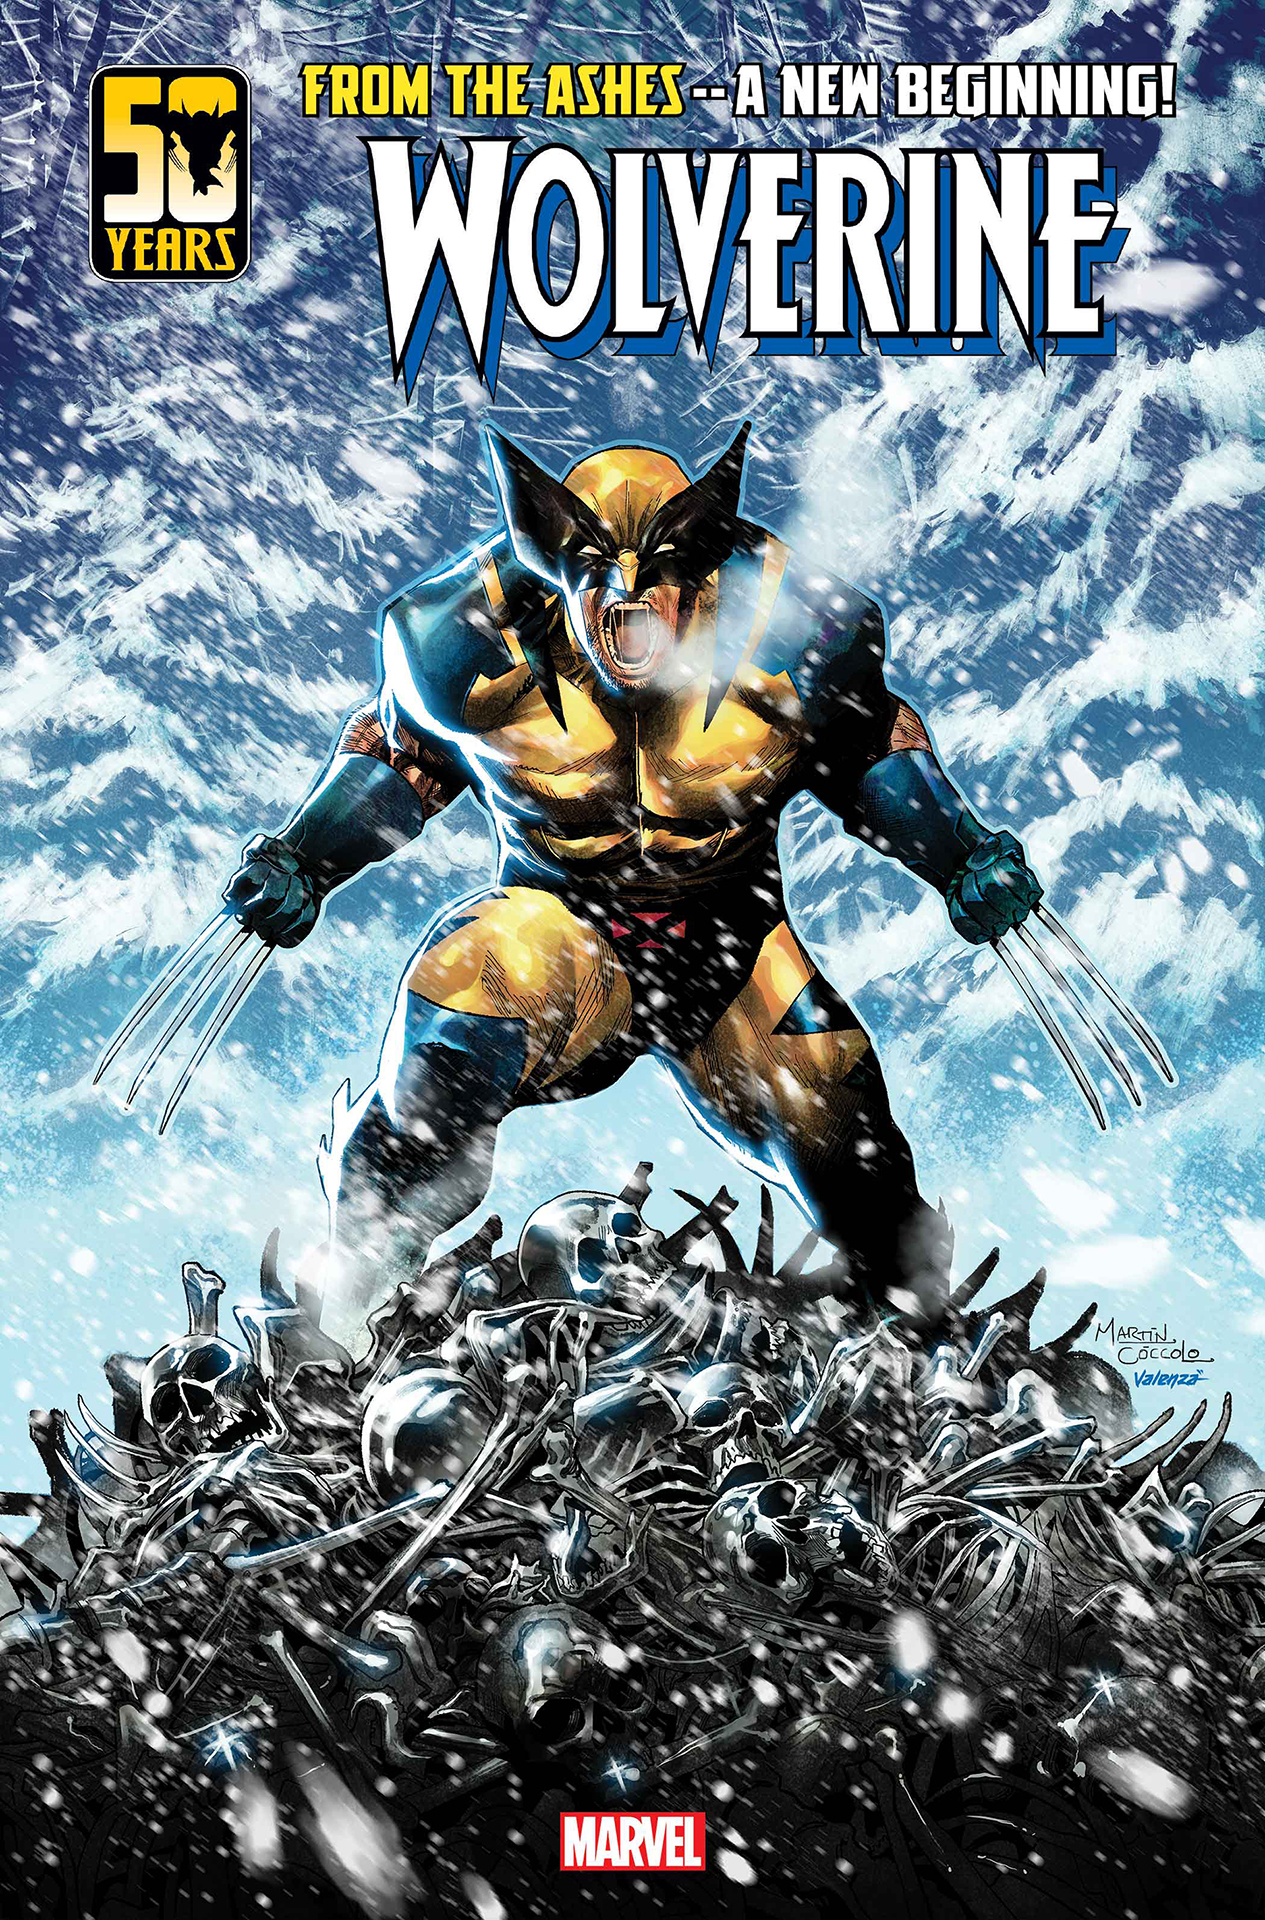 Marvel celebrates 50 years of Wolverine with a new comic series that reveals "a major addition" to the character's lore